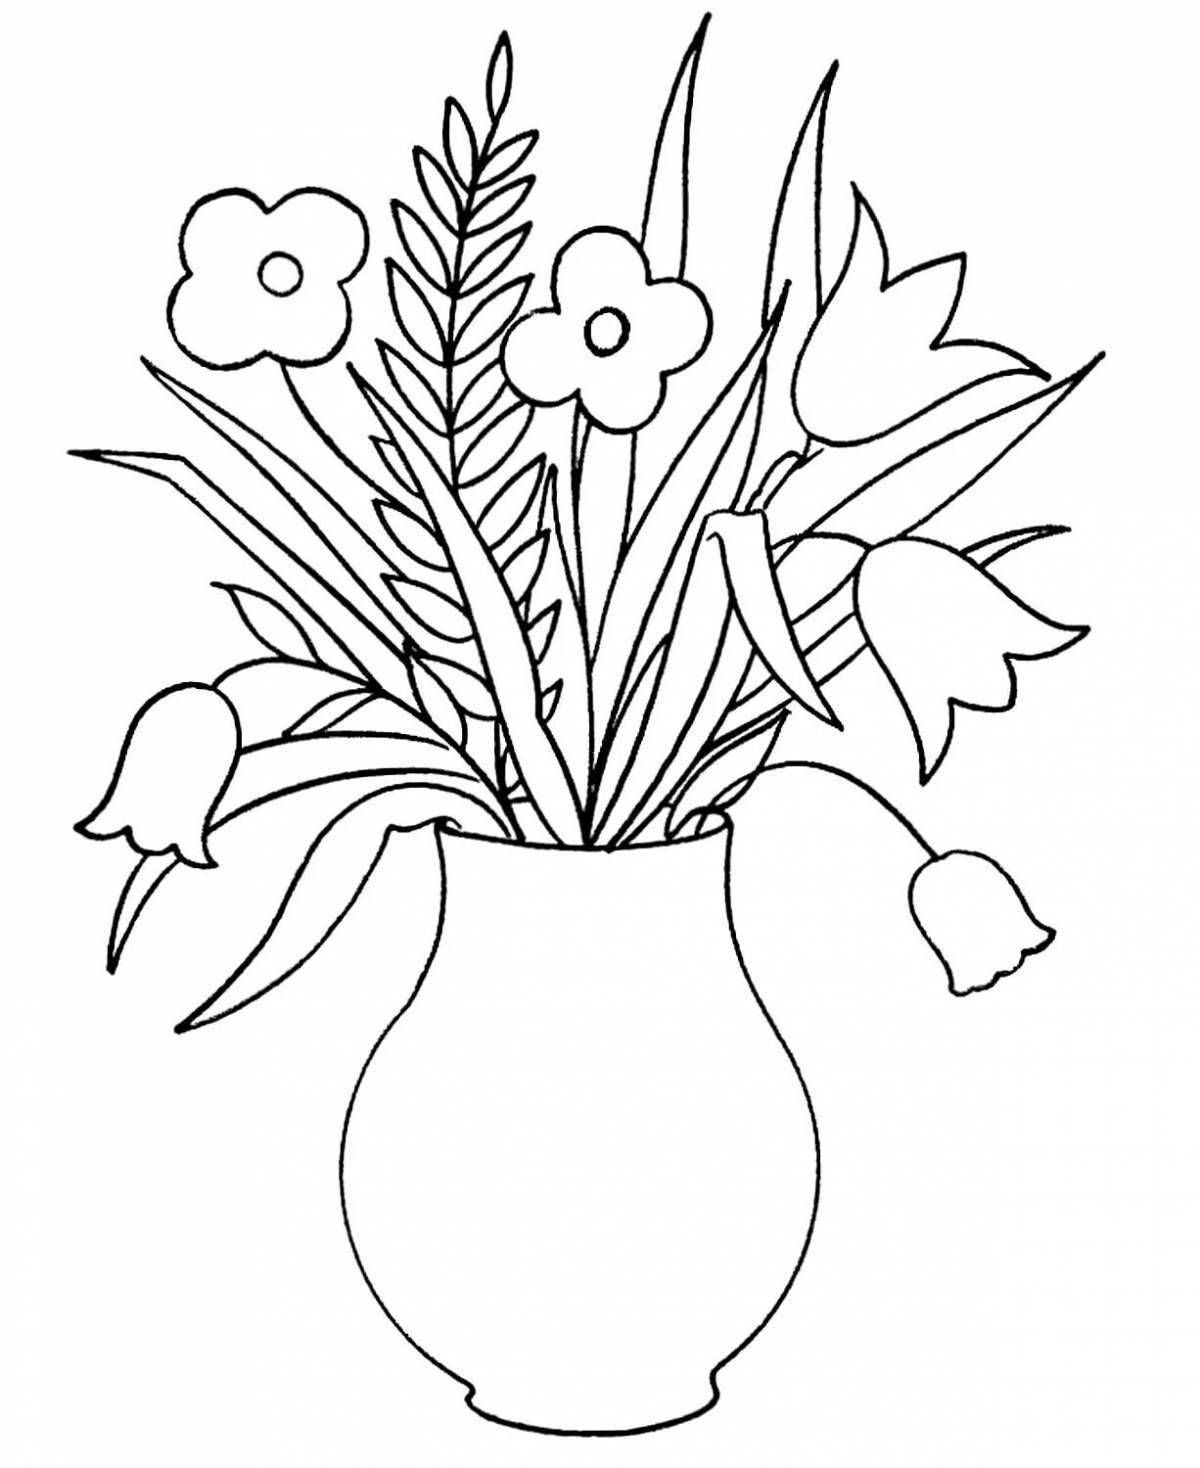 Majestic vase with flowers coloring book for children 5-6 years old